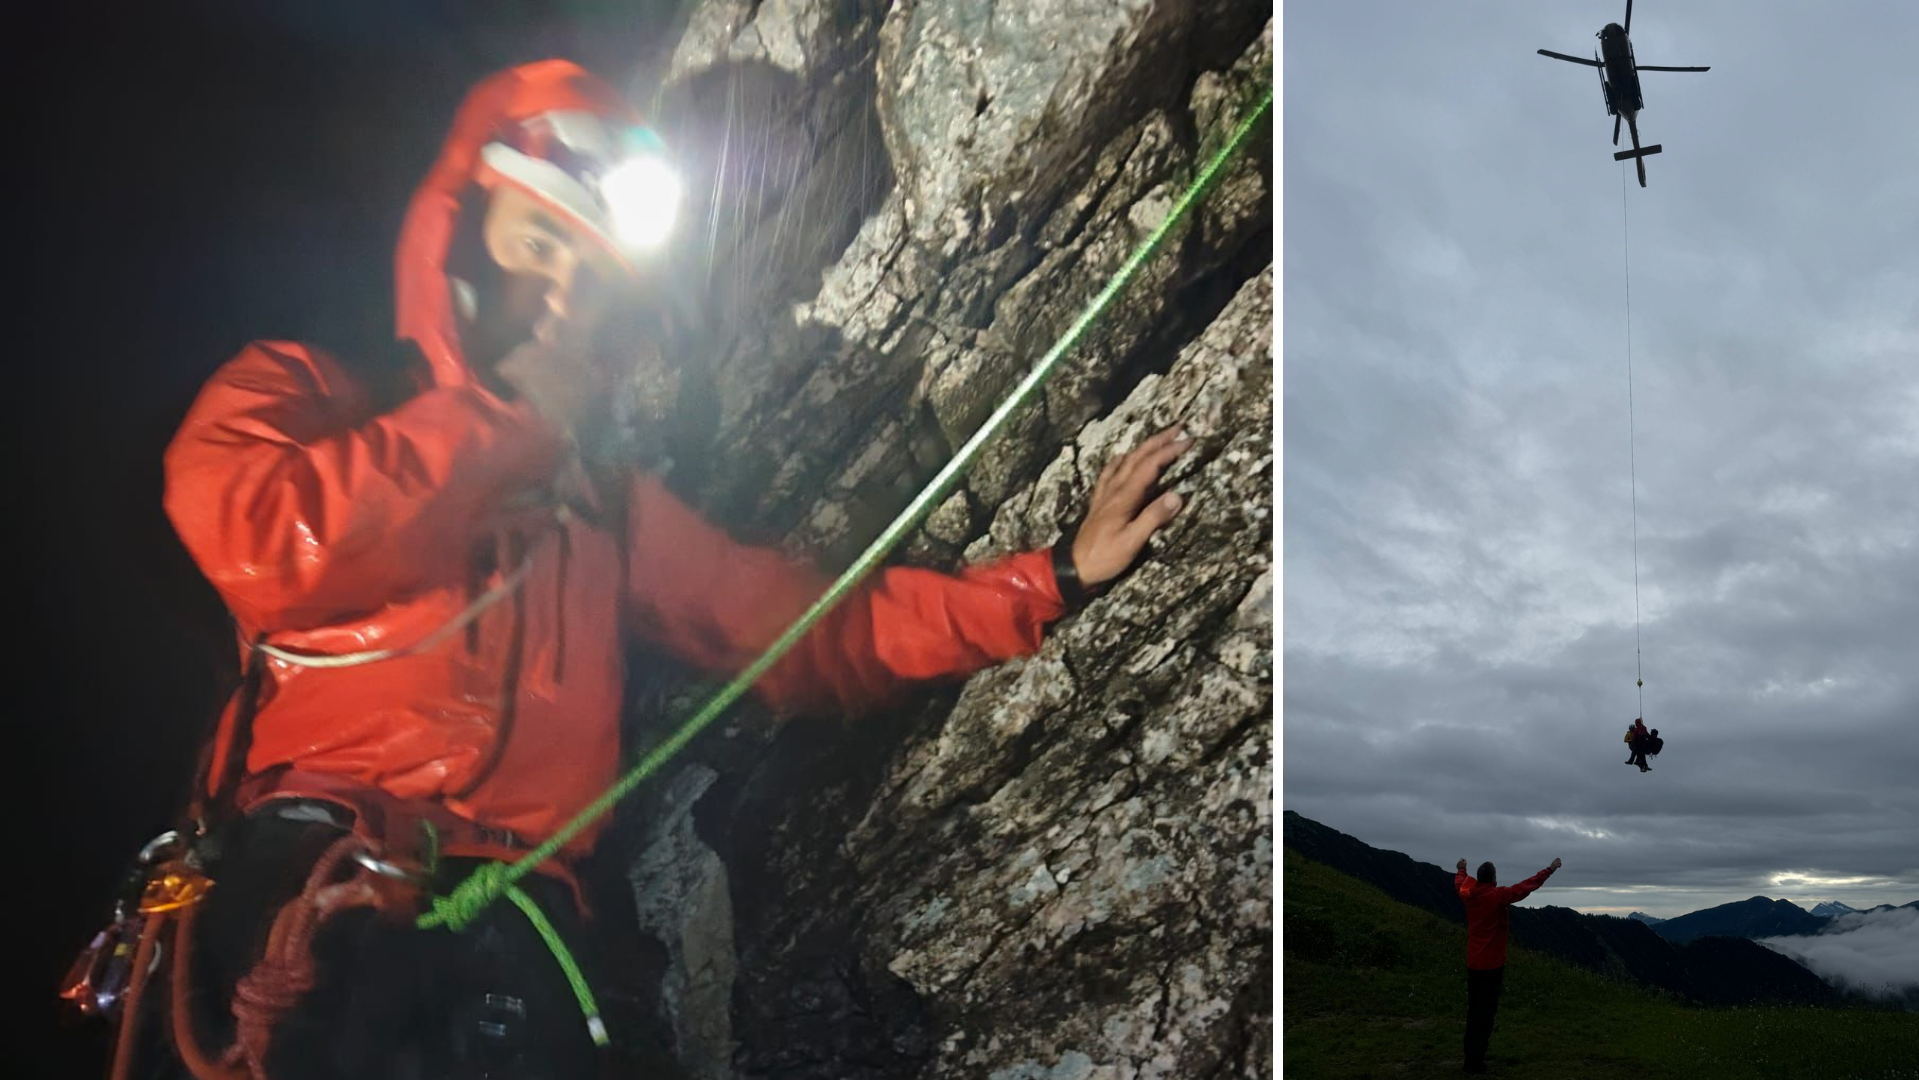 Mountain rescuers from St. Johann (left) climbed up to the Poles in the pouring rain during the night and then helped with the rescue by the emergency helicopter in the morning hours. (Bild: Bergrettung St. Johann)